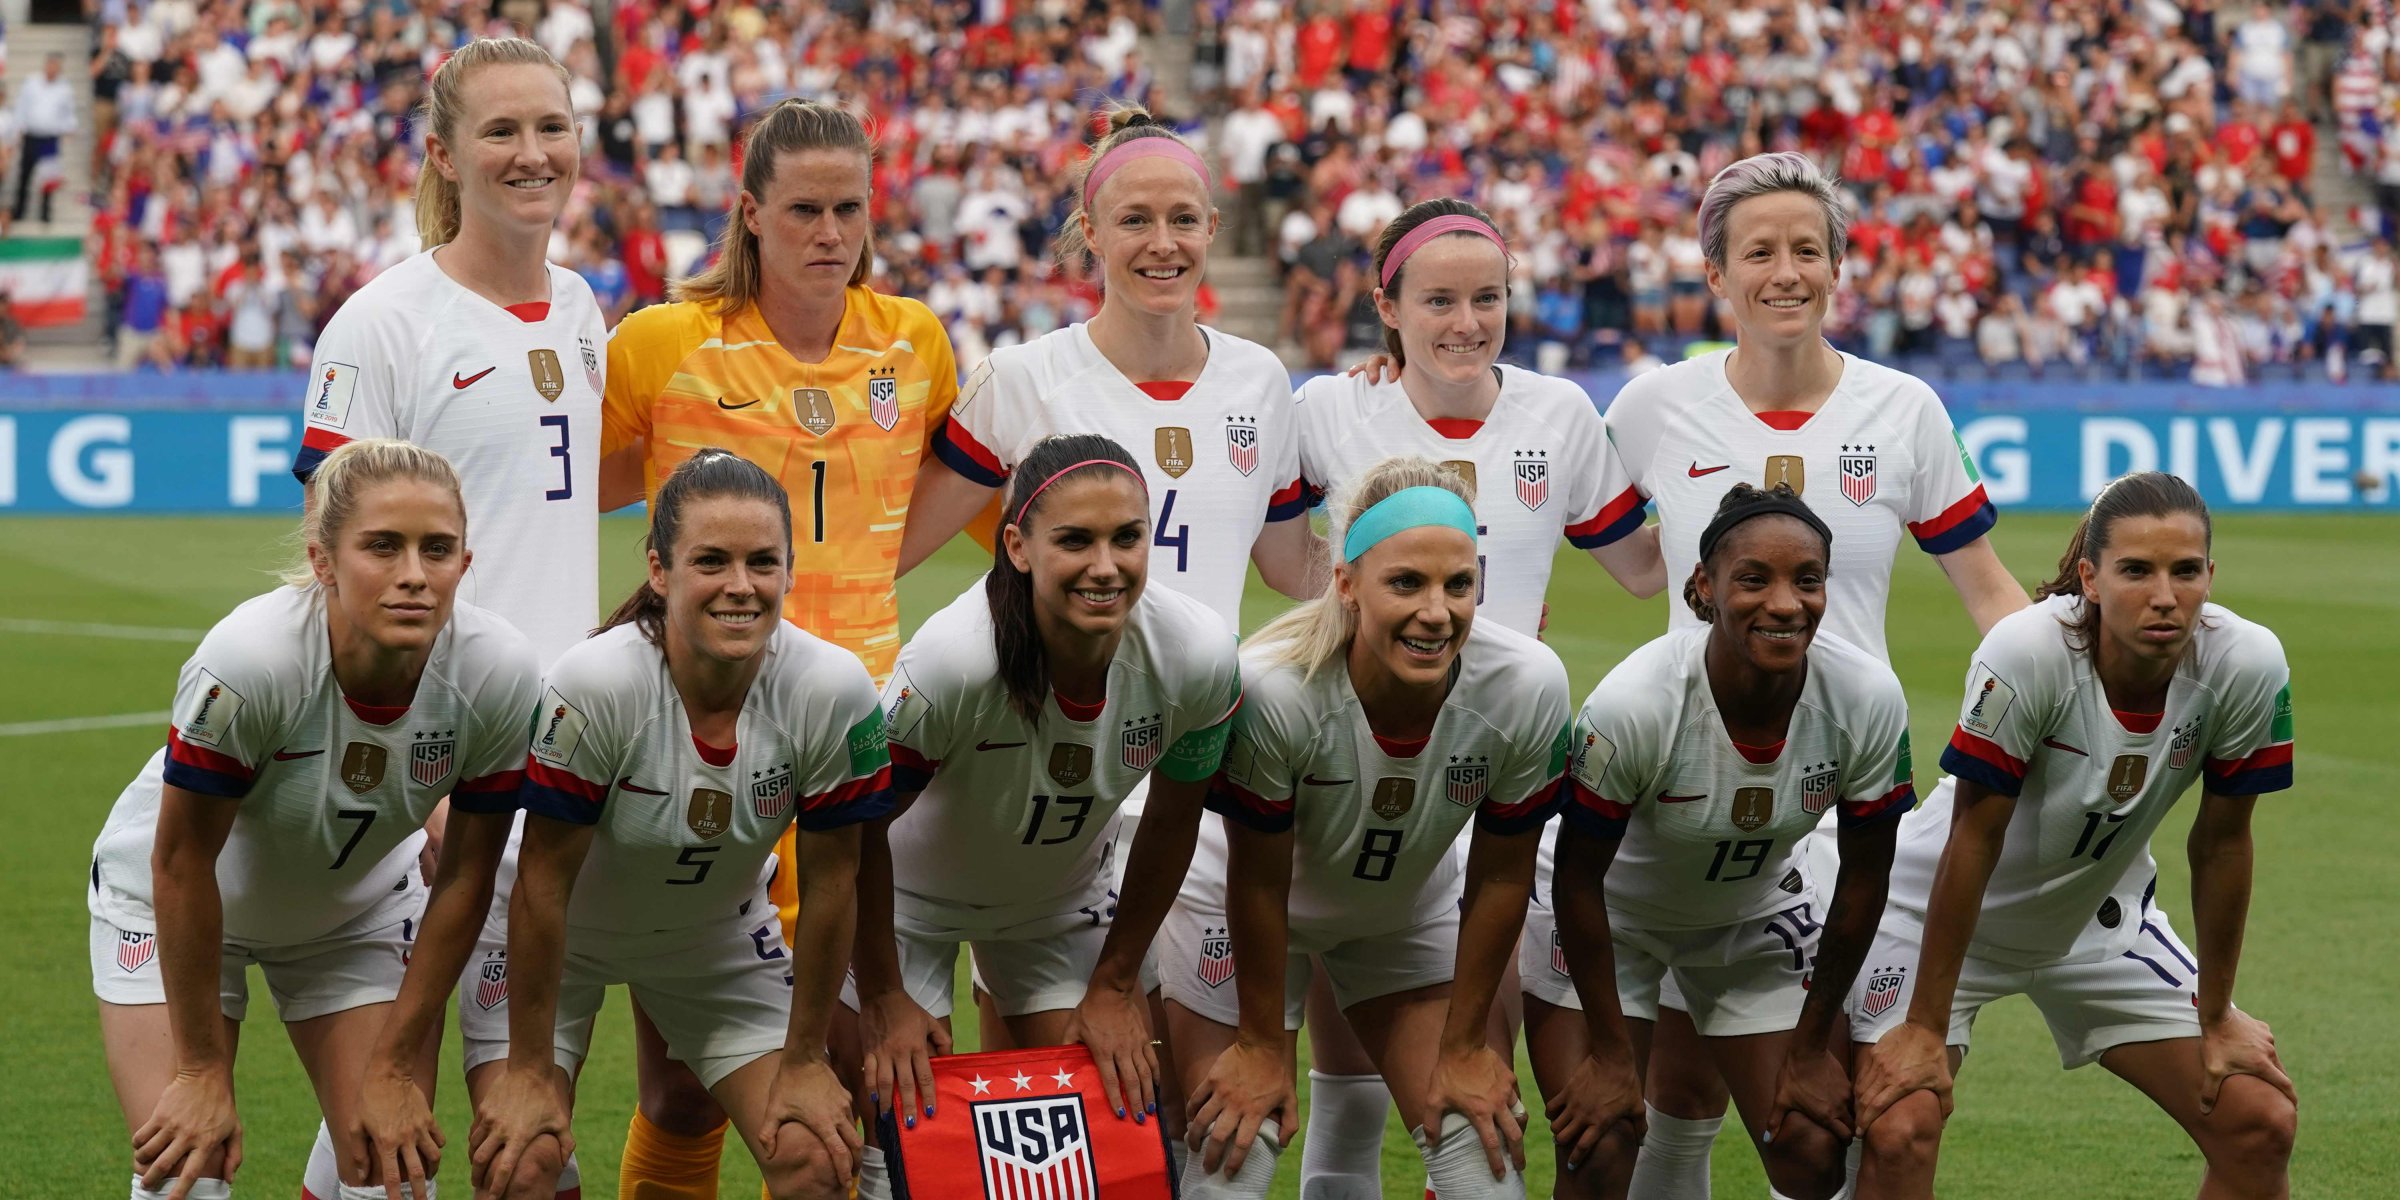 Judge dismisses unequal pay claim by US women's football team - Daily Sabah